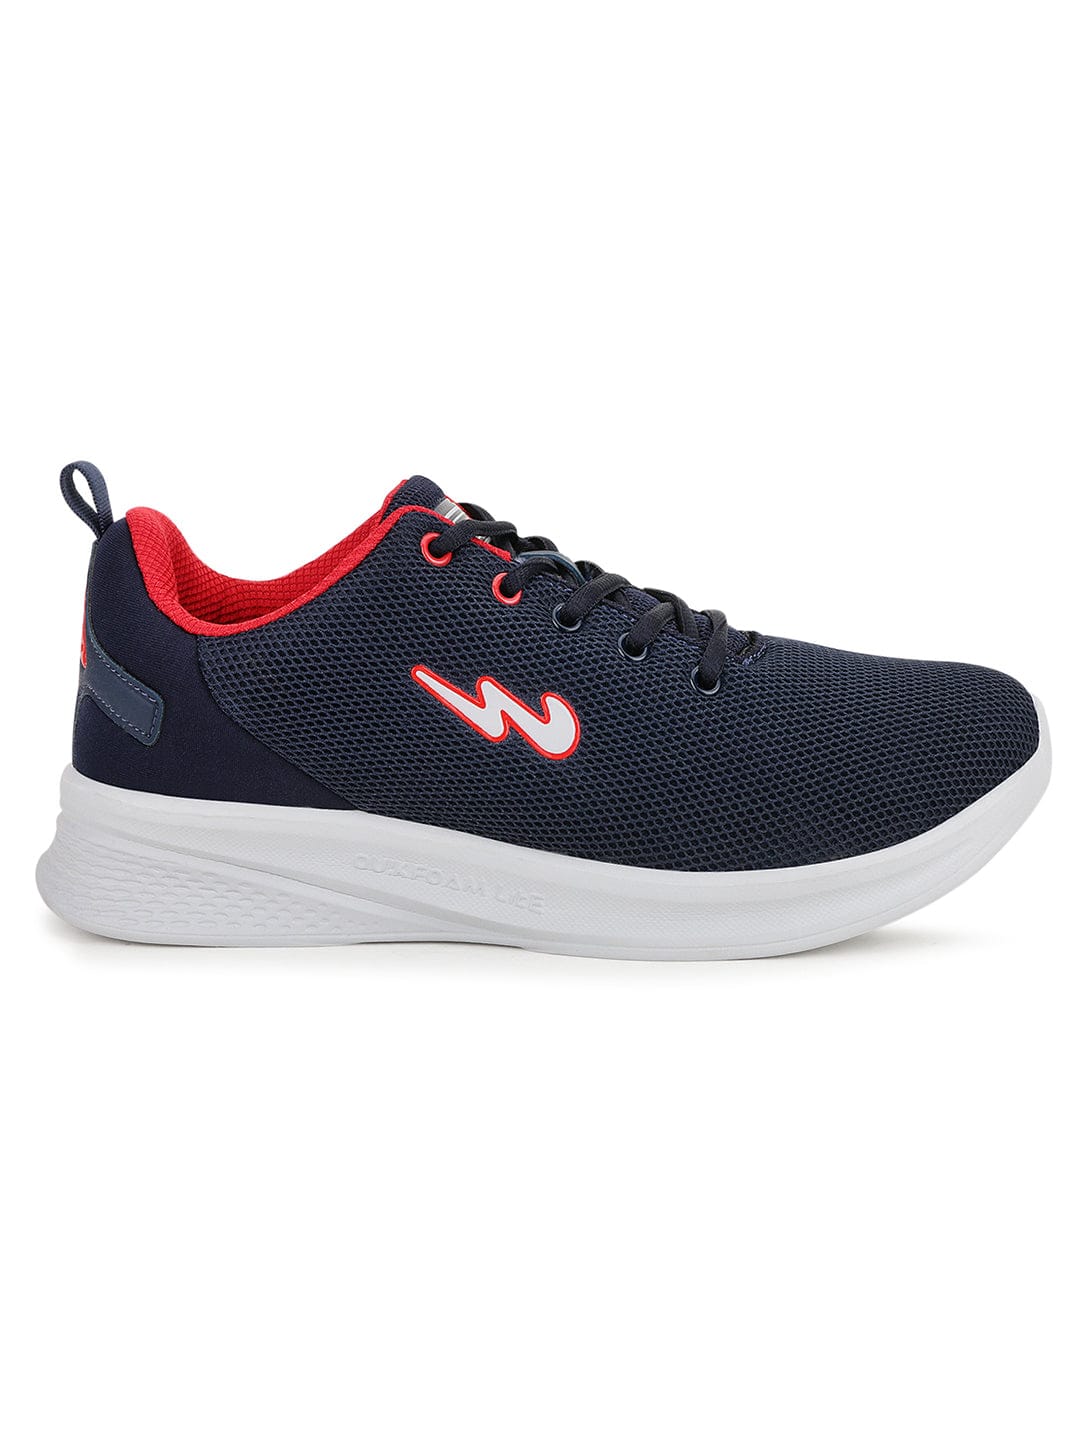 Buy Running Shoes For Men: Town-Blu-Red | Campus Shoes